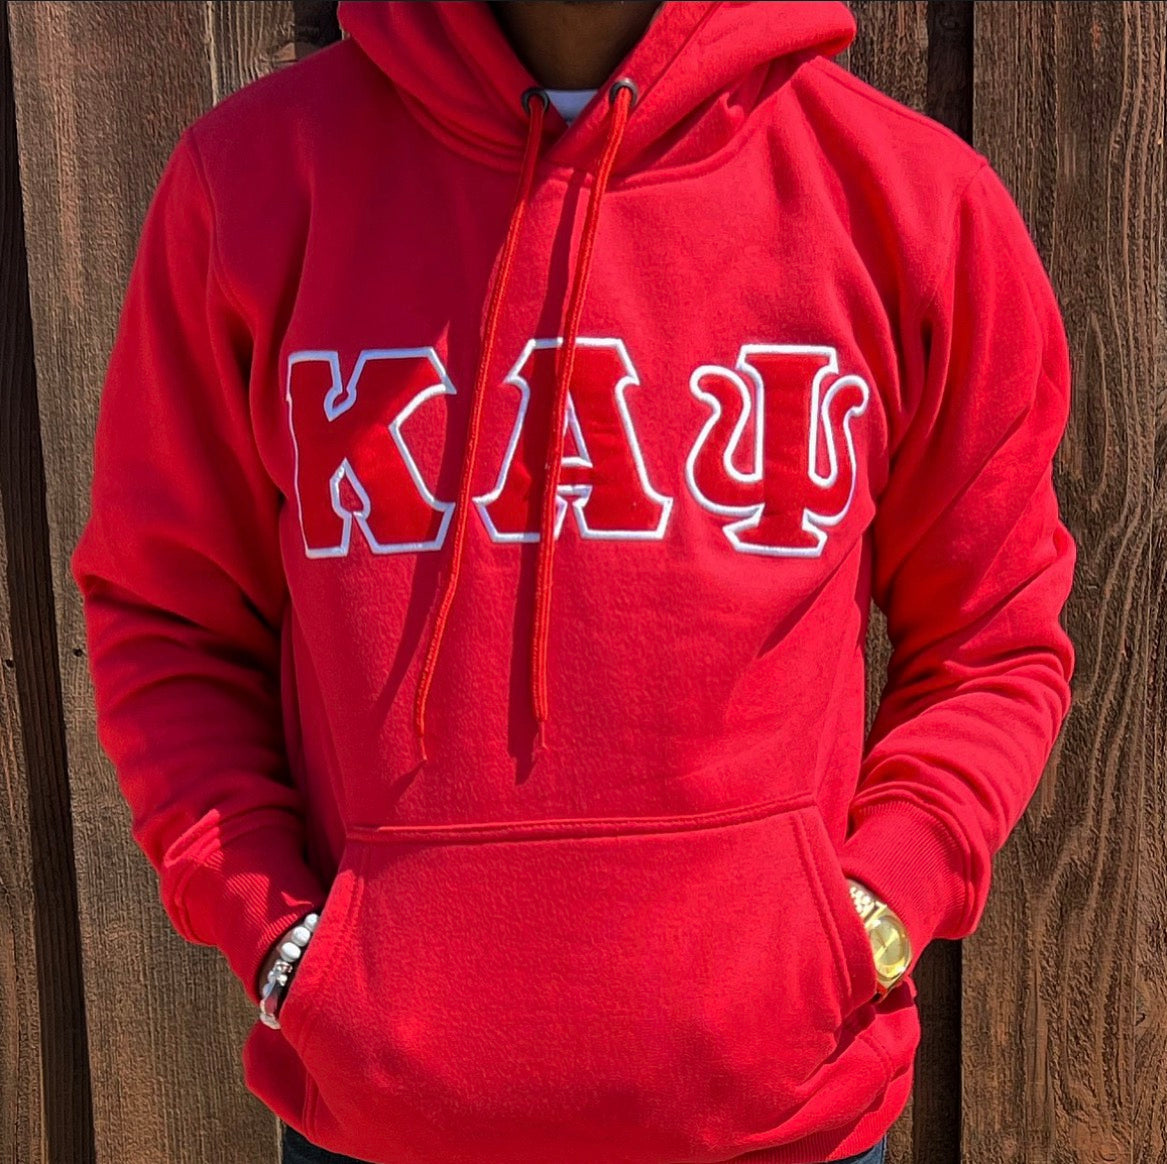 Exclusive Kappa Alpha Psi Double Stitched Appliqué Embroidery Lettered Hoodie. This is the perfect long-sleeved hoodie to wear while showing off your Kappa Alpha Psi fraternity lettering. A comfortable 100% cotton tee with a twill Greek letters embroidery across the chest give you the perfect fit. This hoodie is also a perfect gift or your favorite Kappa Man.